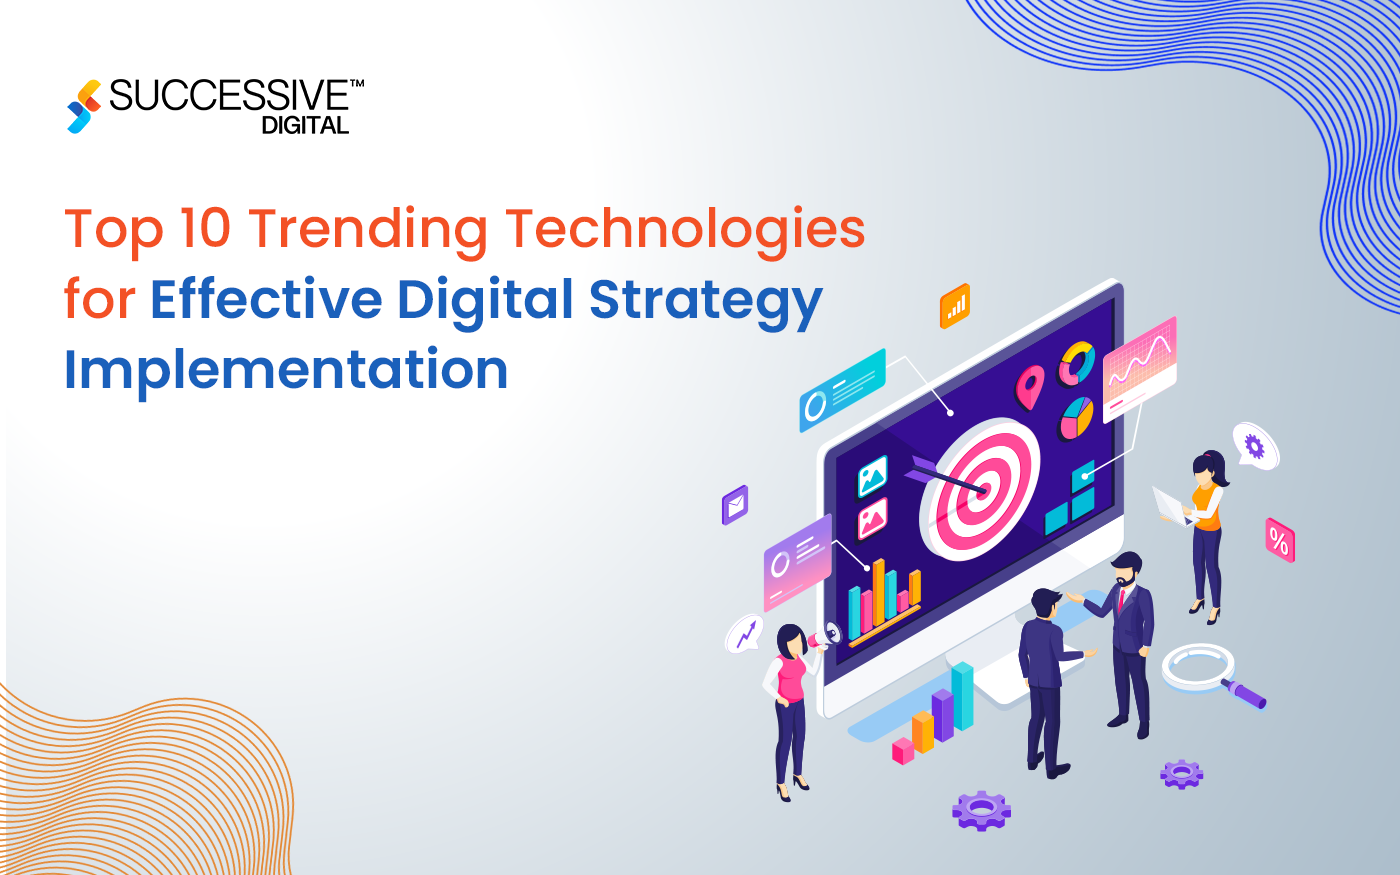 Top 10 Trending Technologies for Effective Digital Strategy Implementation